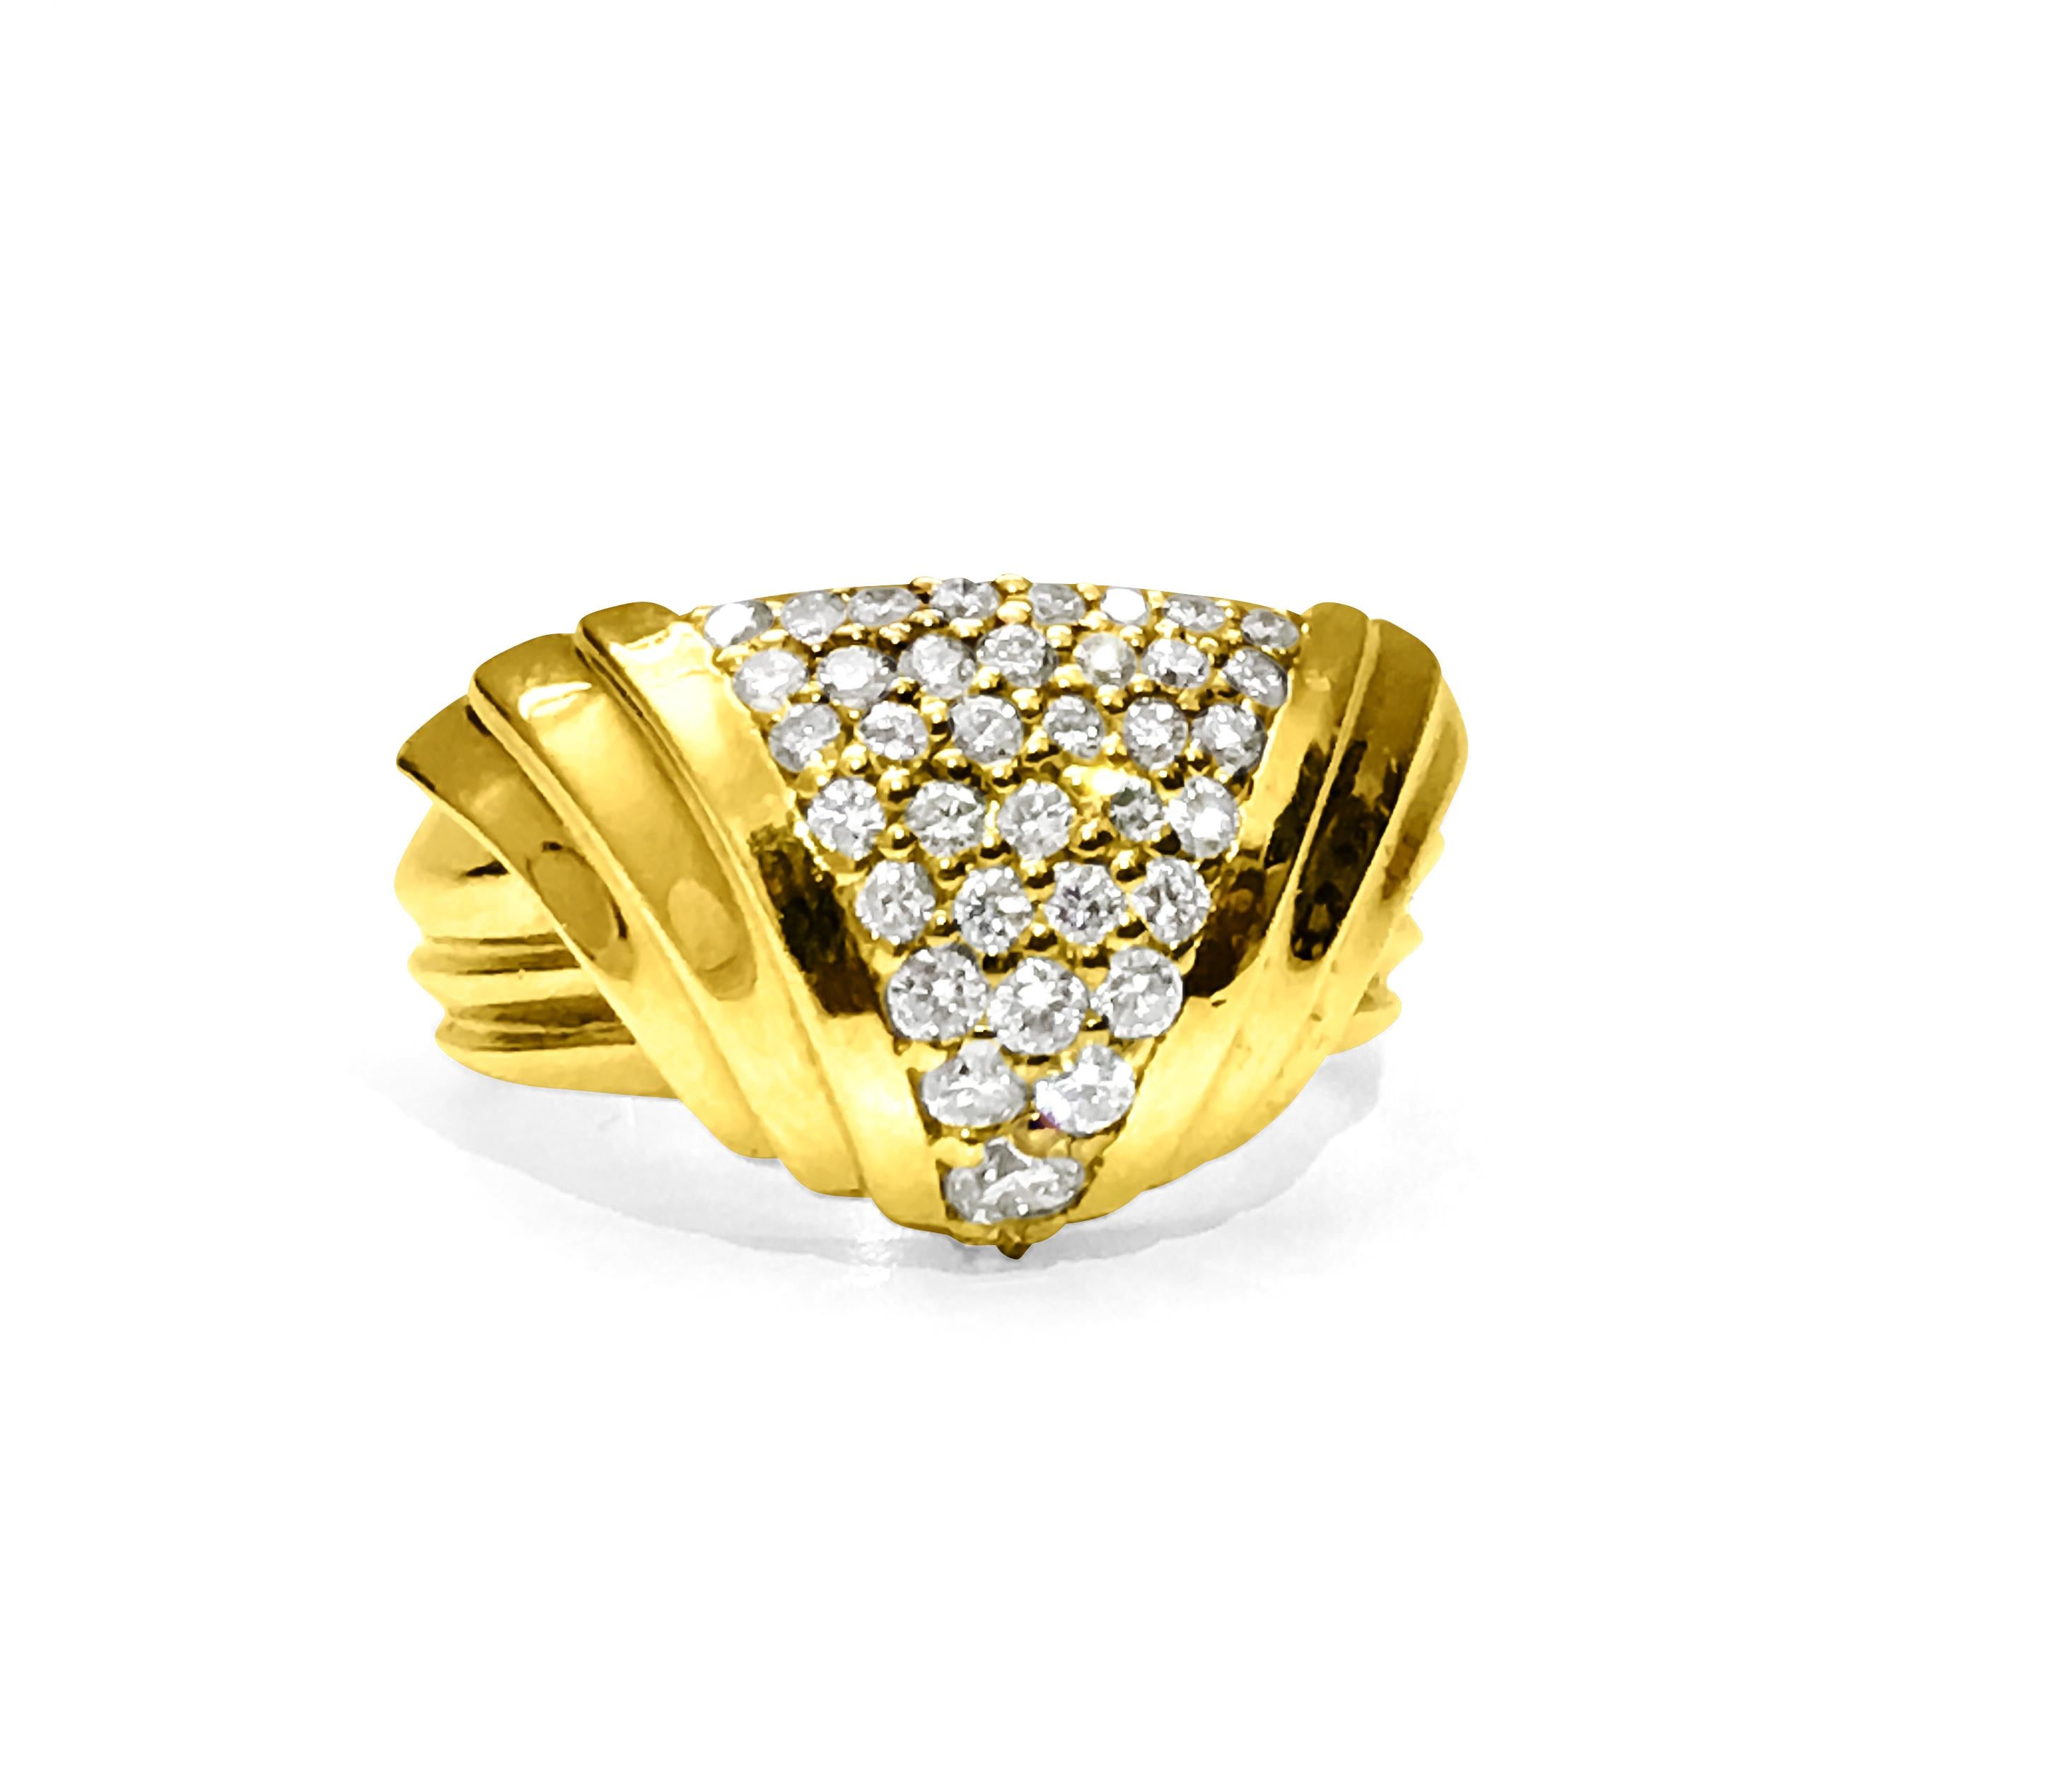 Women's or Men's Art Deco Style 1.10 Carat Diamond and Yellow Gold Ring For Sale